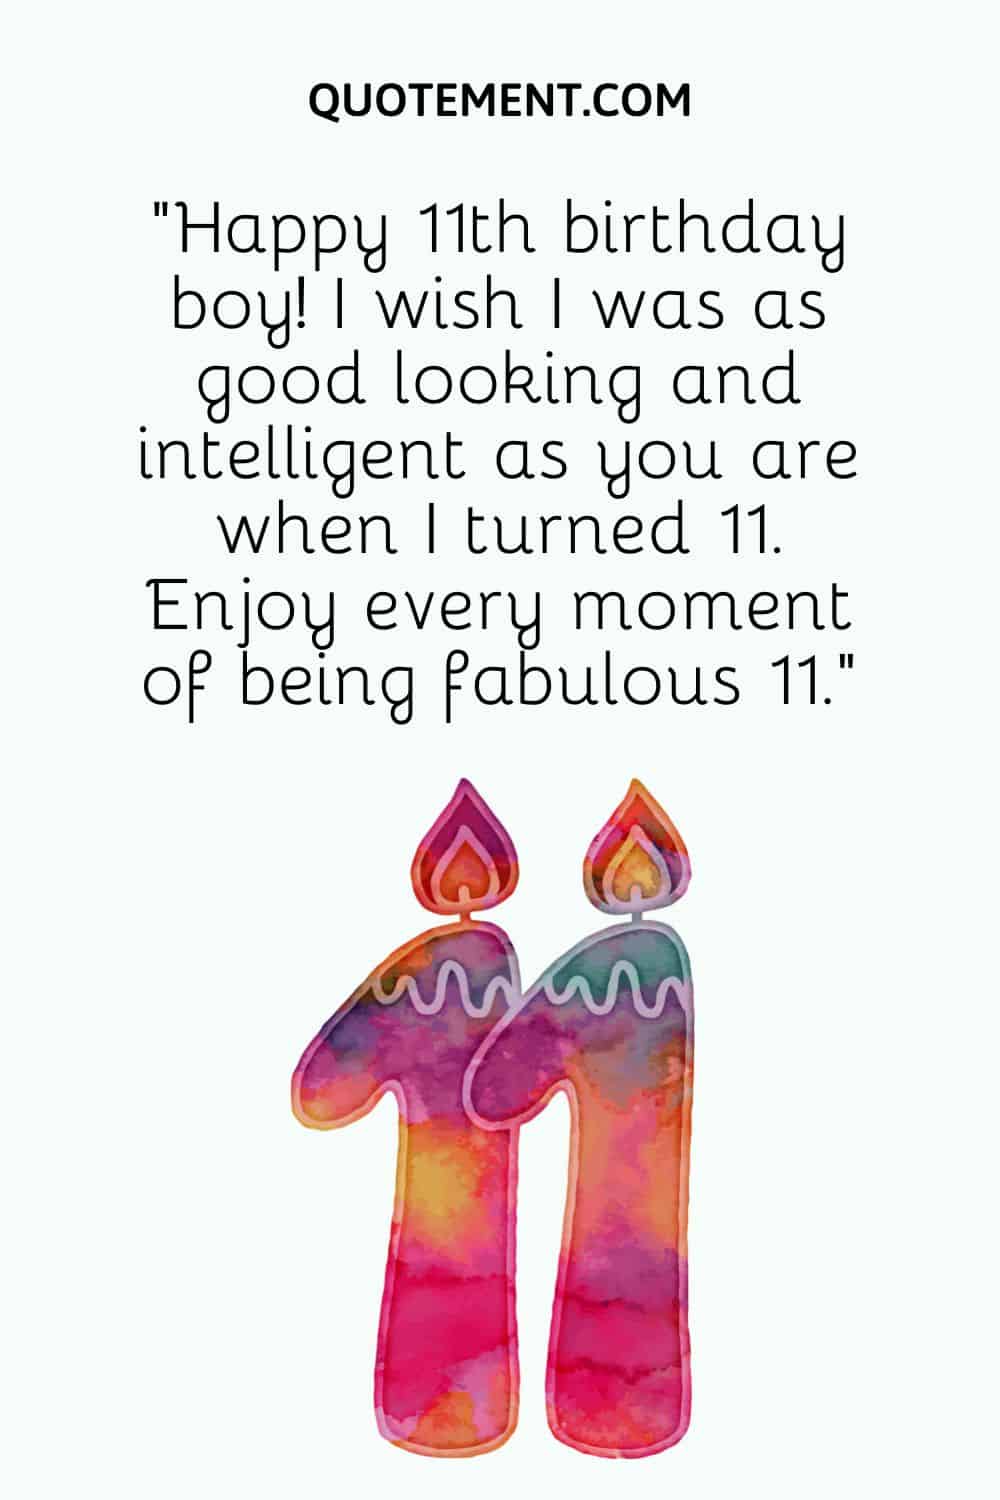 “Happy 11th birthday boy! I wish I was as good looking and intelligent as you are when I turned 11. Enjoy every moment of being fabulous 11.”